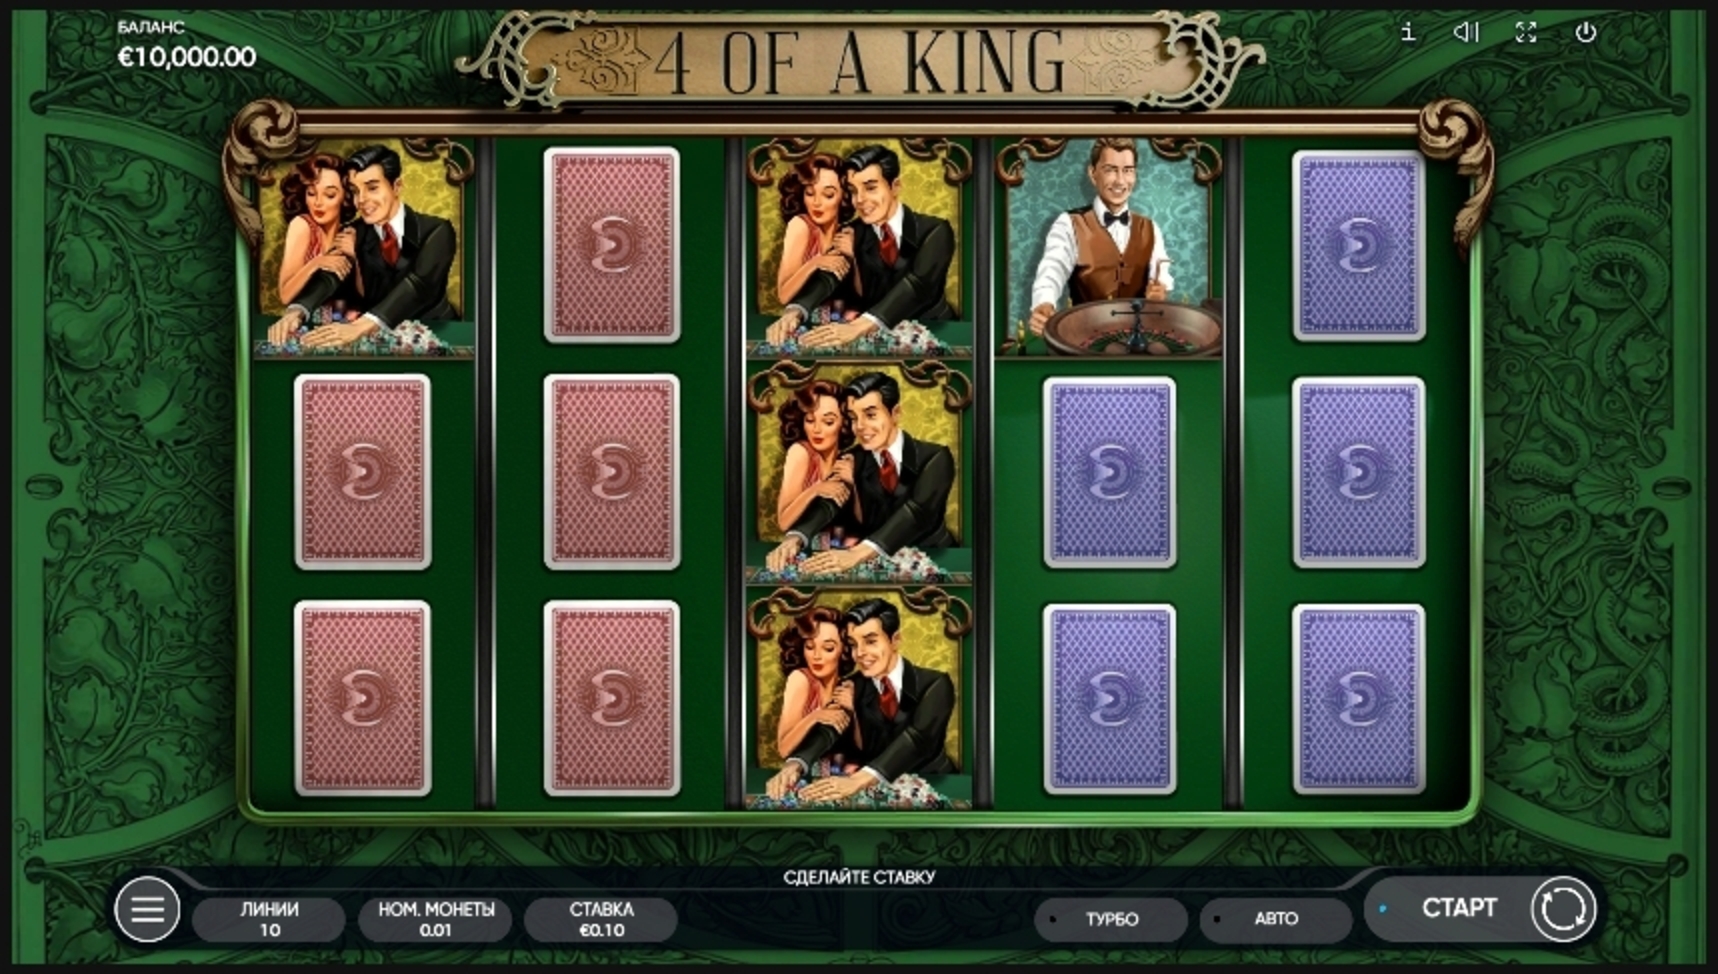 Reels in 4 of the King Slot Game by Endorphina